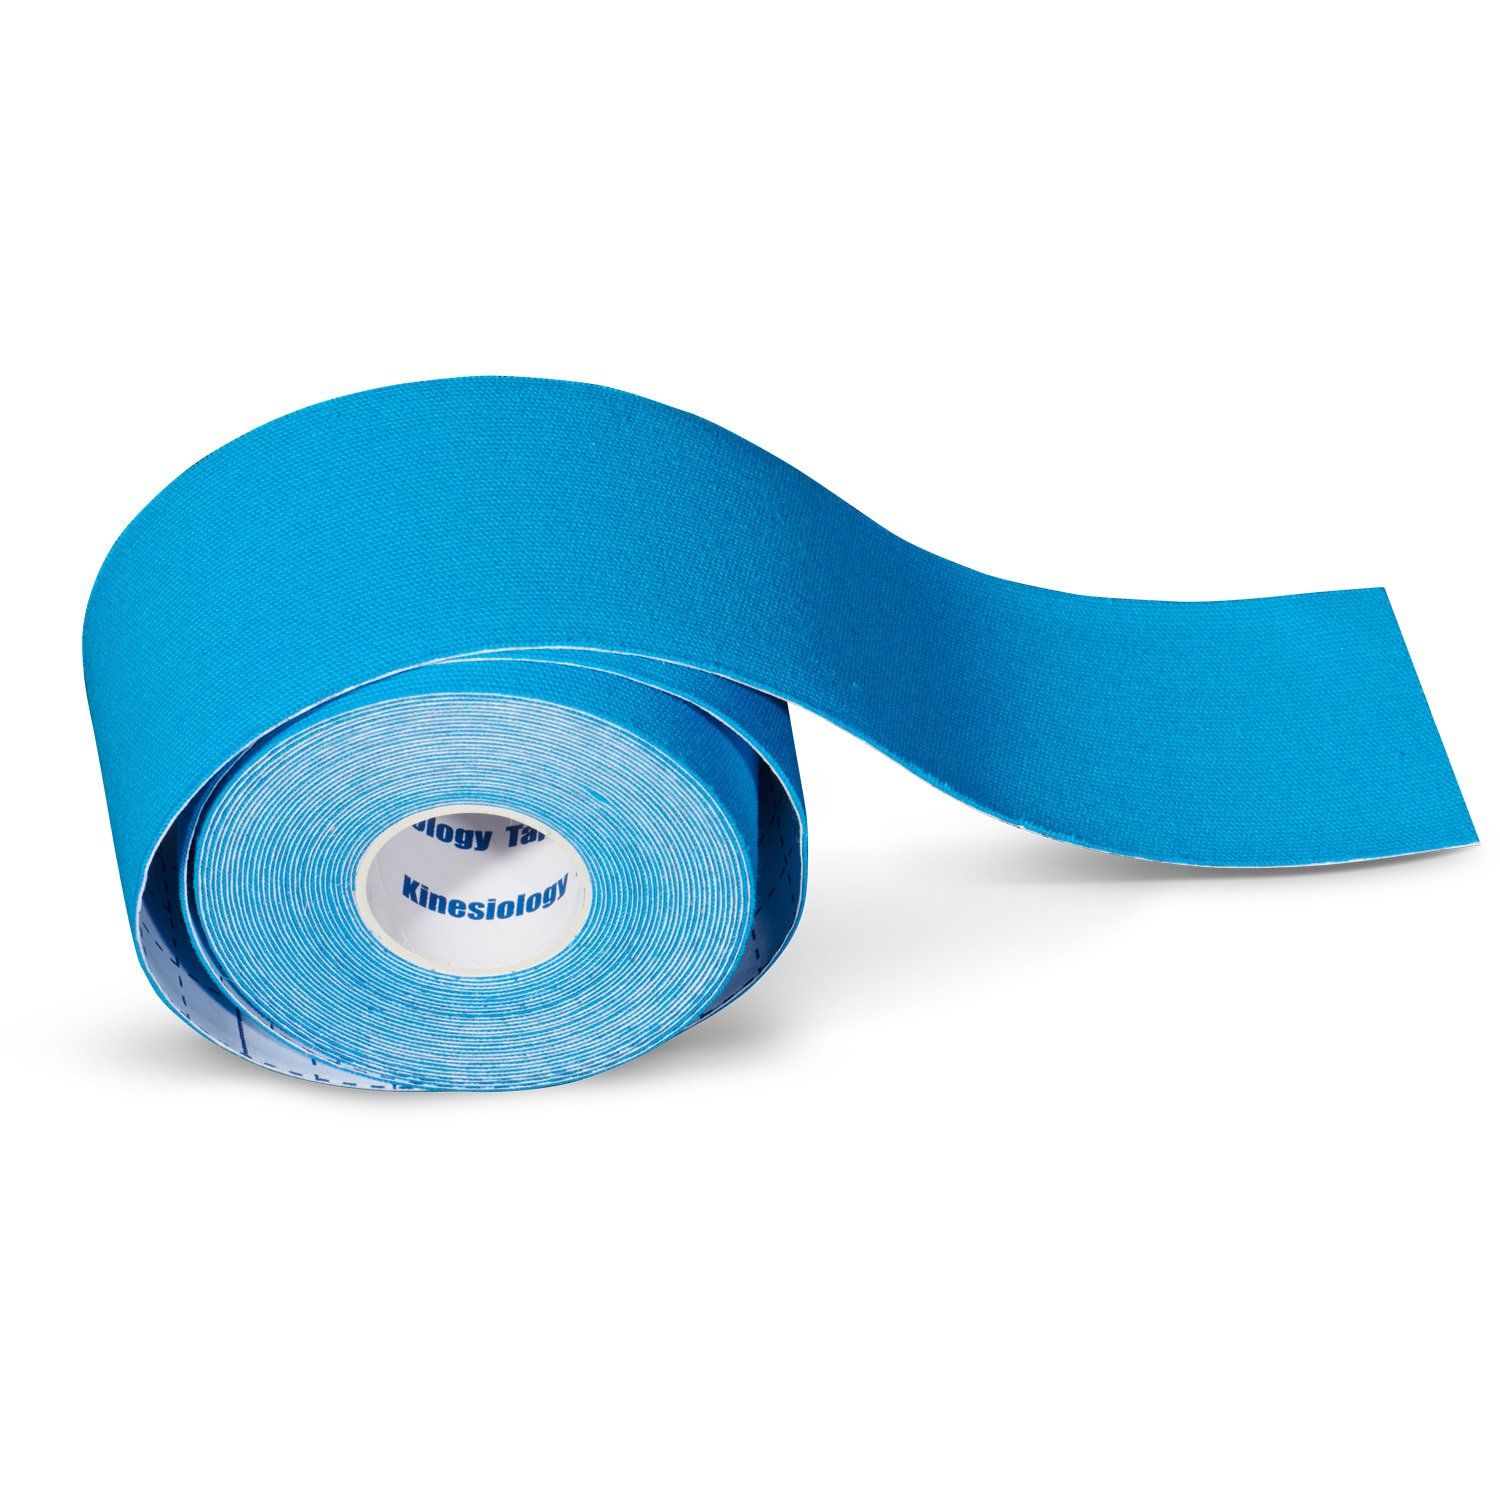 Kinesiology tape 6 rolls plus 2 rolls for free blue